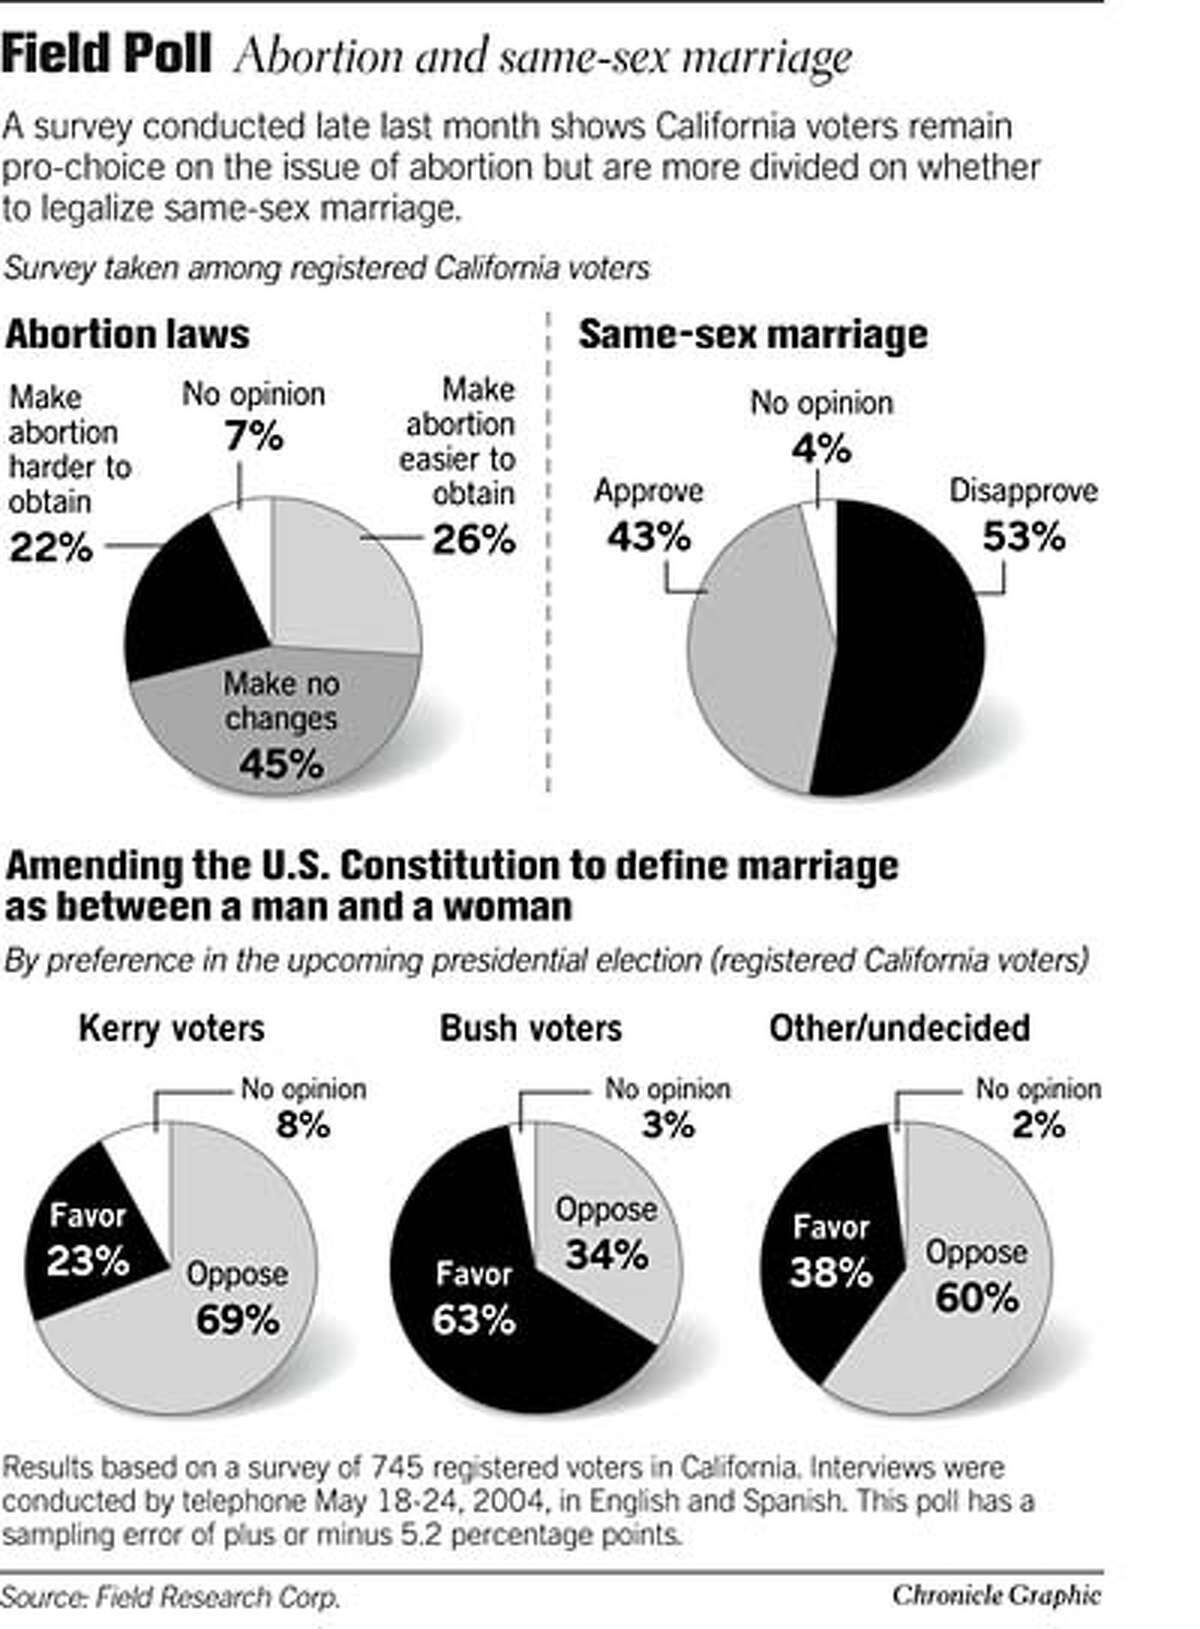 Field Poll State Voters Still Pro Choice Mixed On Same Sex Marriage Survey Shows